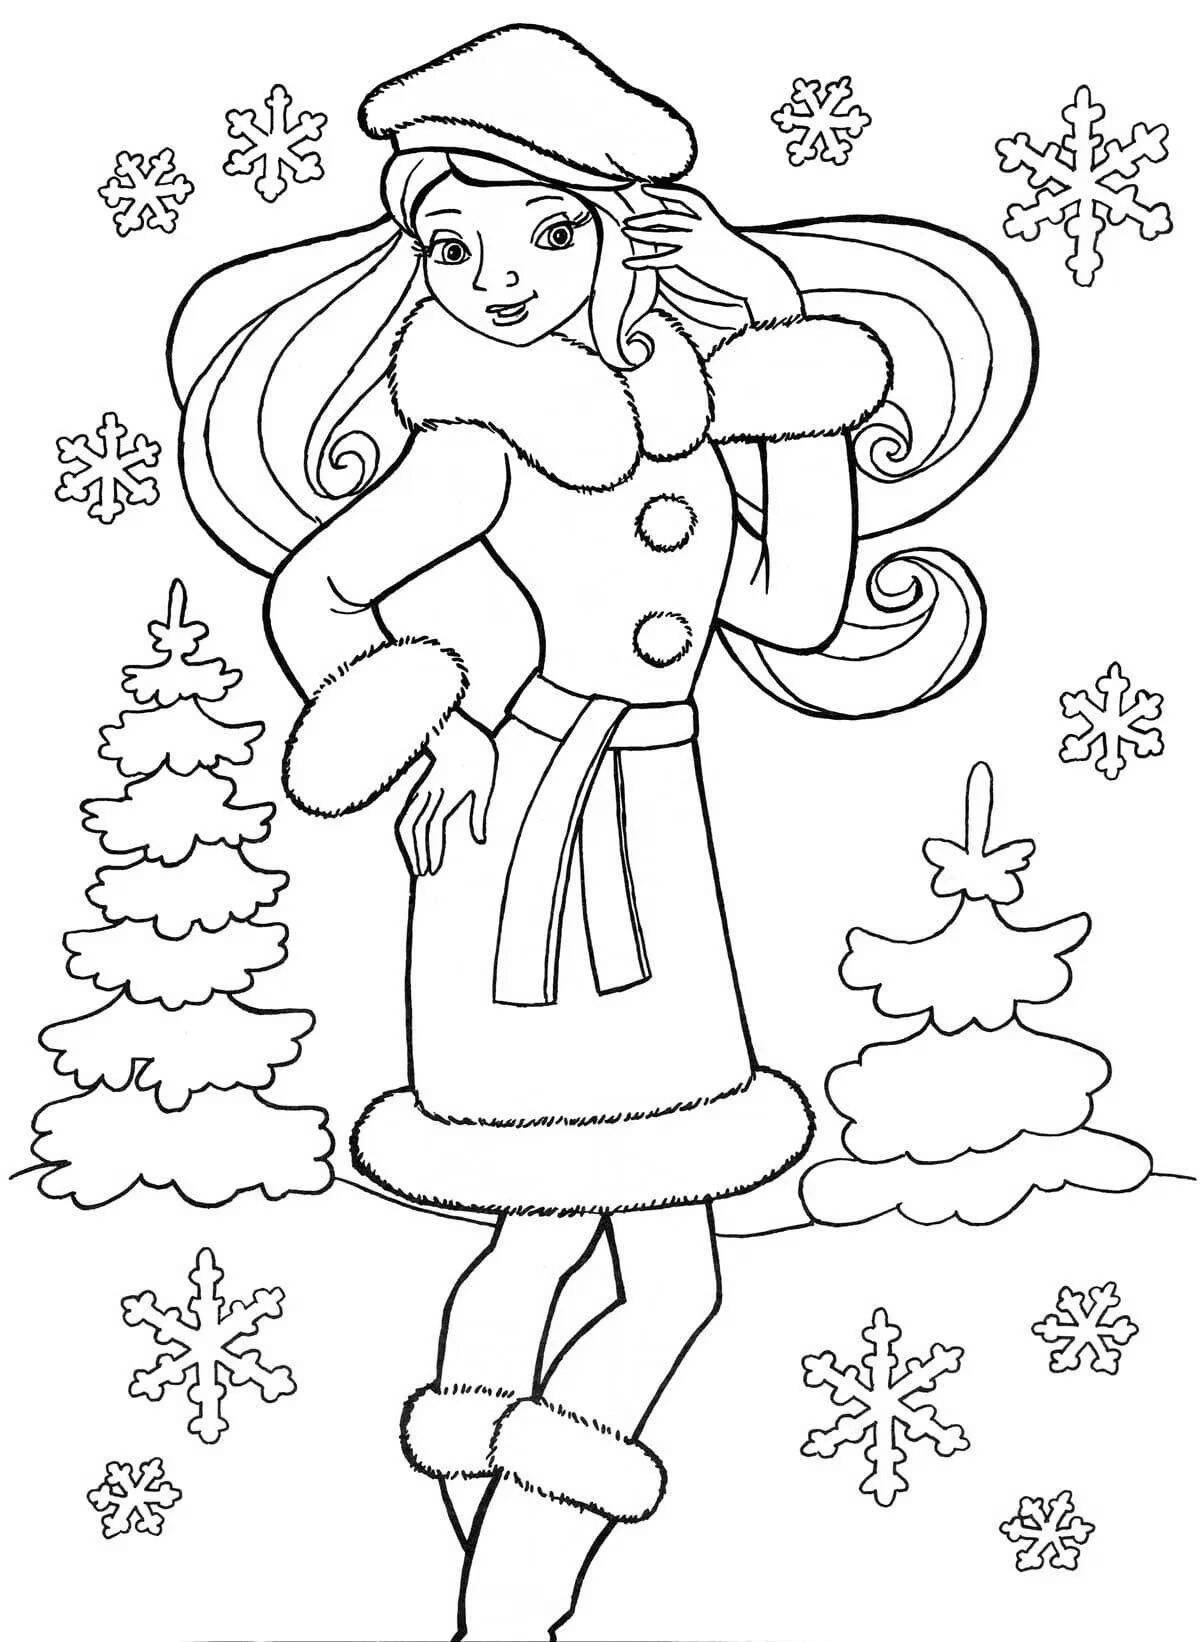 Charming Christmas coloring book for girls 8 years old